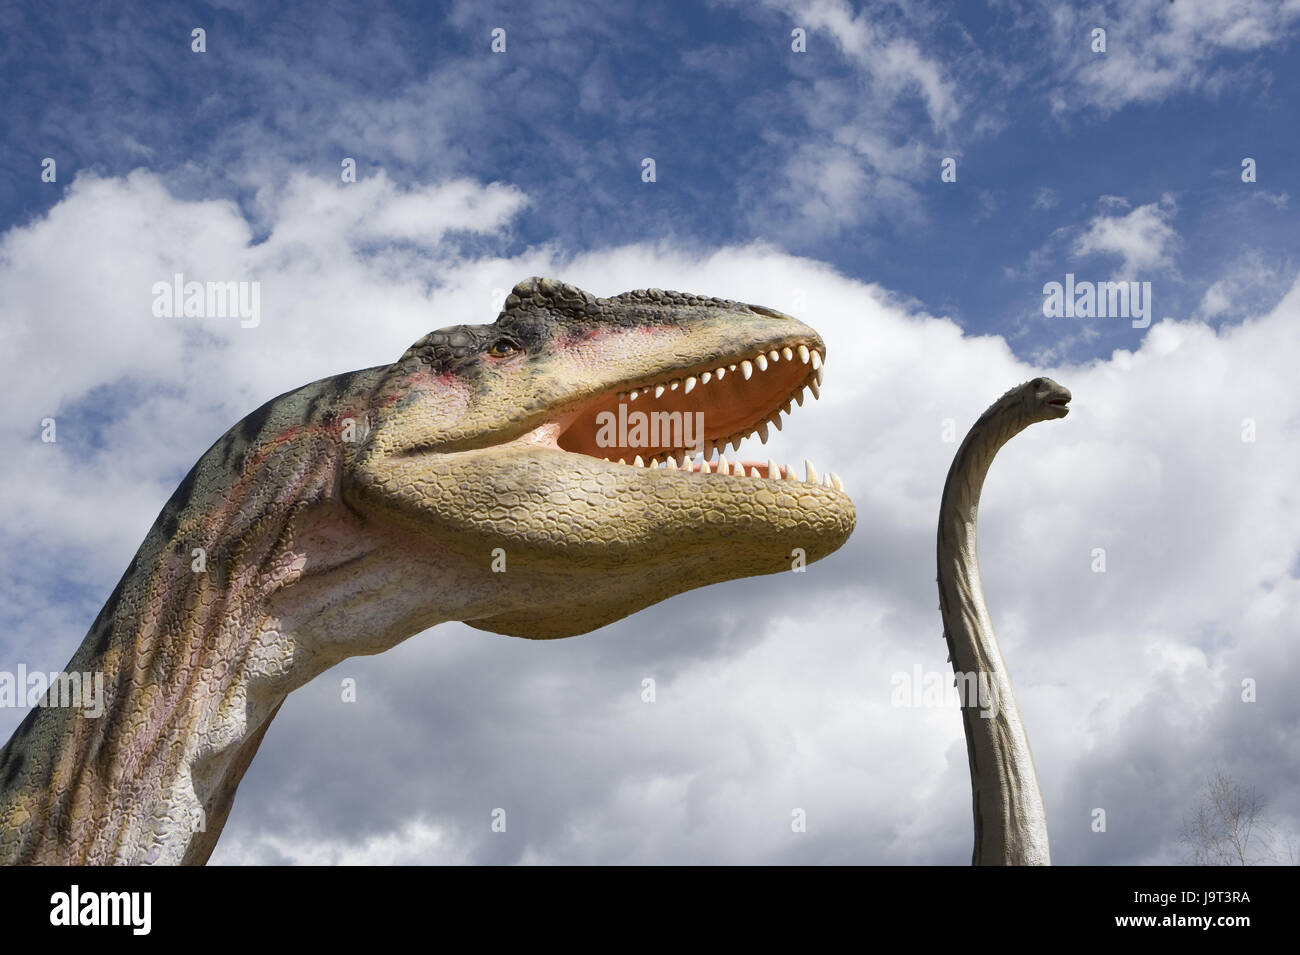 Dinosaur,page portrait,cloudy sky,animals,animal world,old animals,primeval times,saurians,lifelike,dangerously,menacingly,Tyrannosaurus rex,prehistorically,extinct,saurian models,models,simulations,replicas,reconstruction,plastically,natural size,brontosaurus,Apatosaurus,size,neck,head,two,herbivore,carnivore,sky,clouds,nobody,outside, Stock Photo